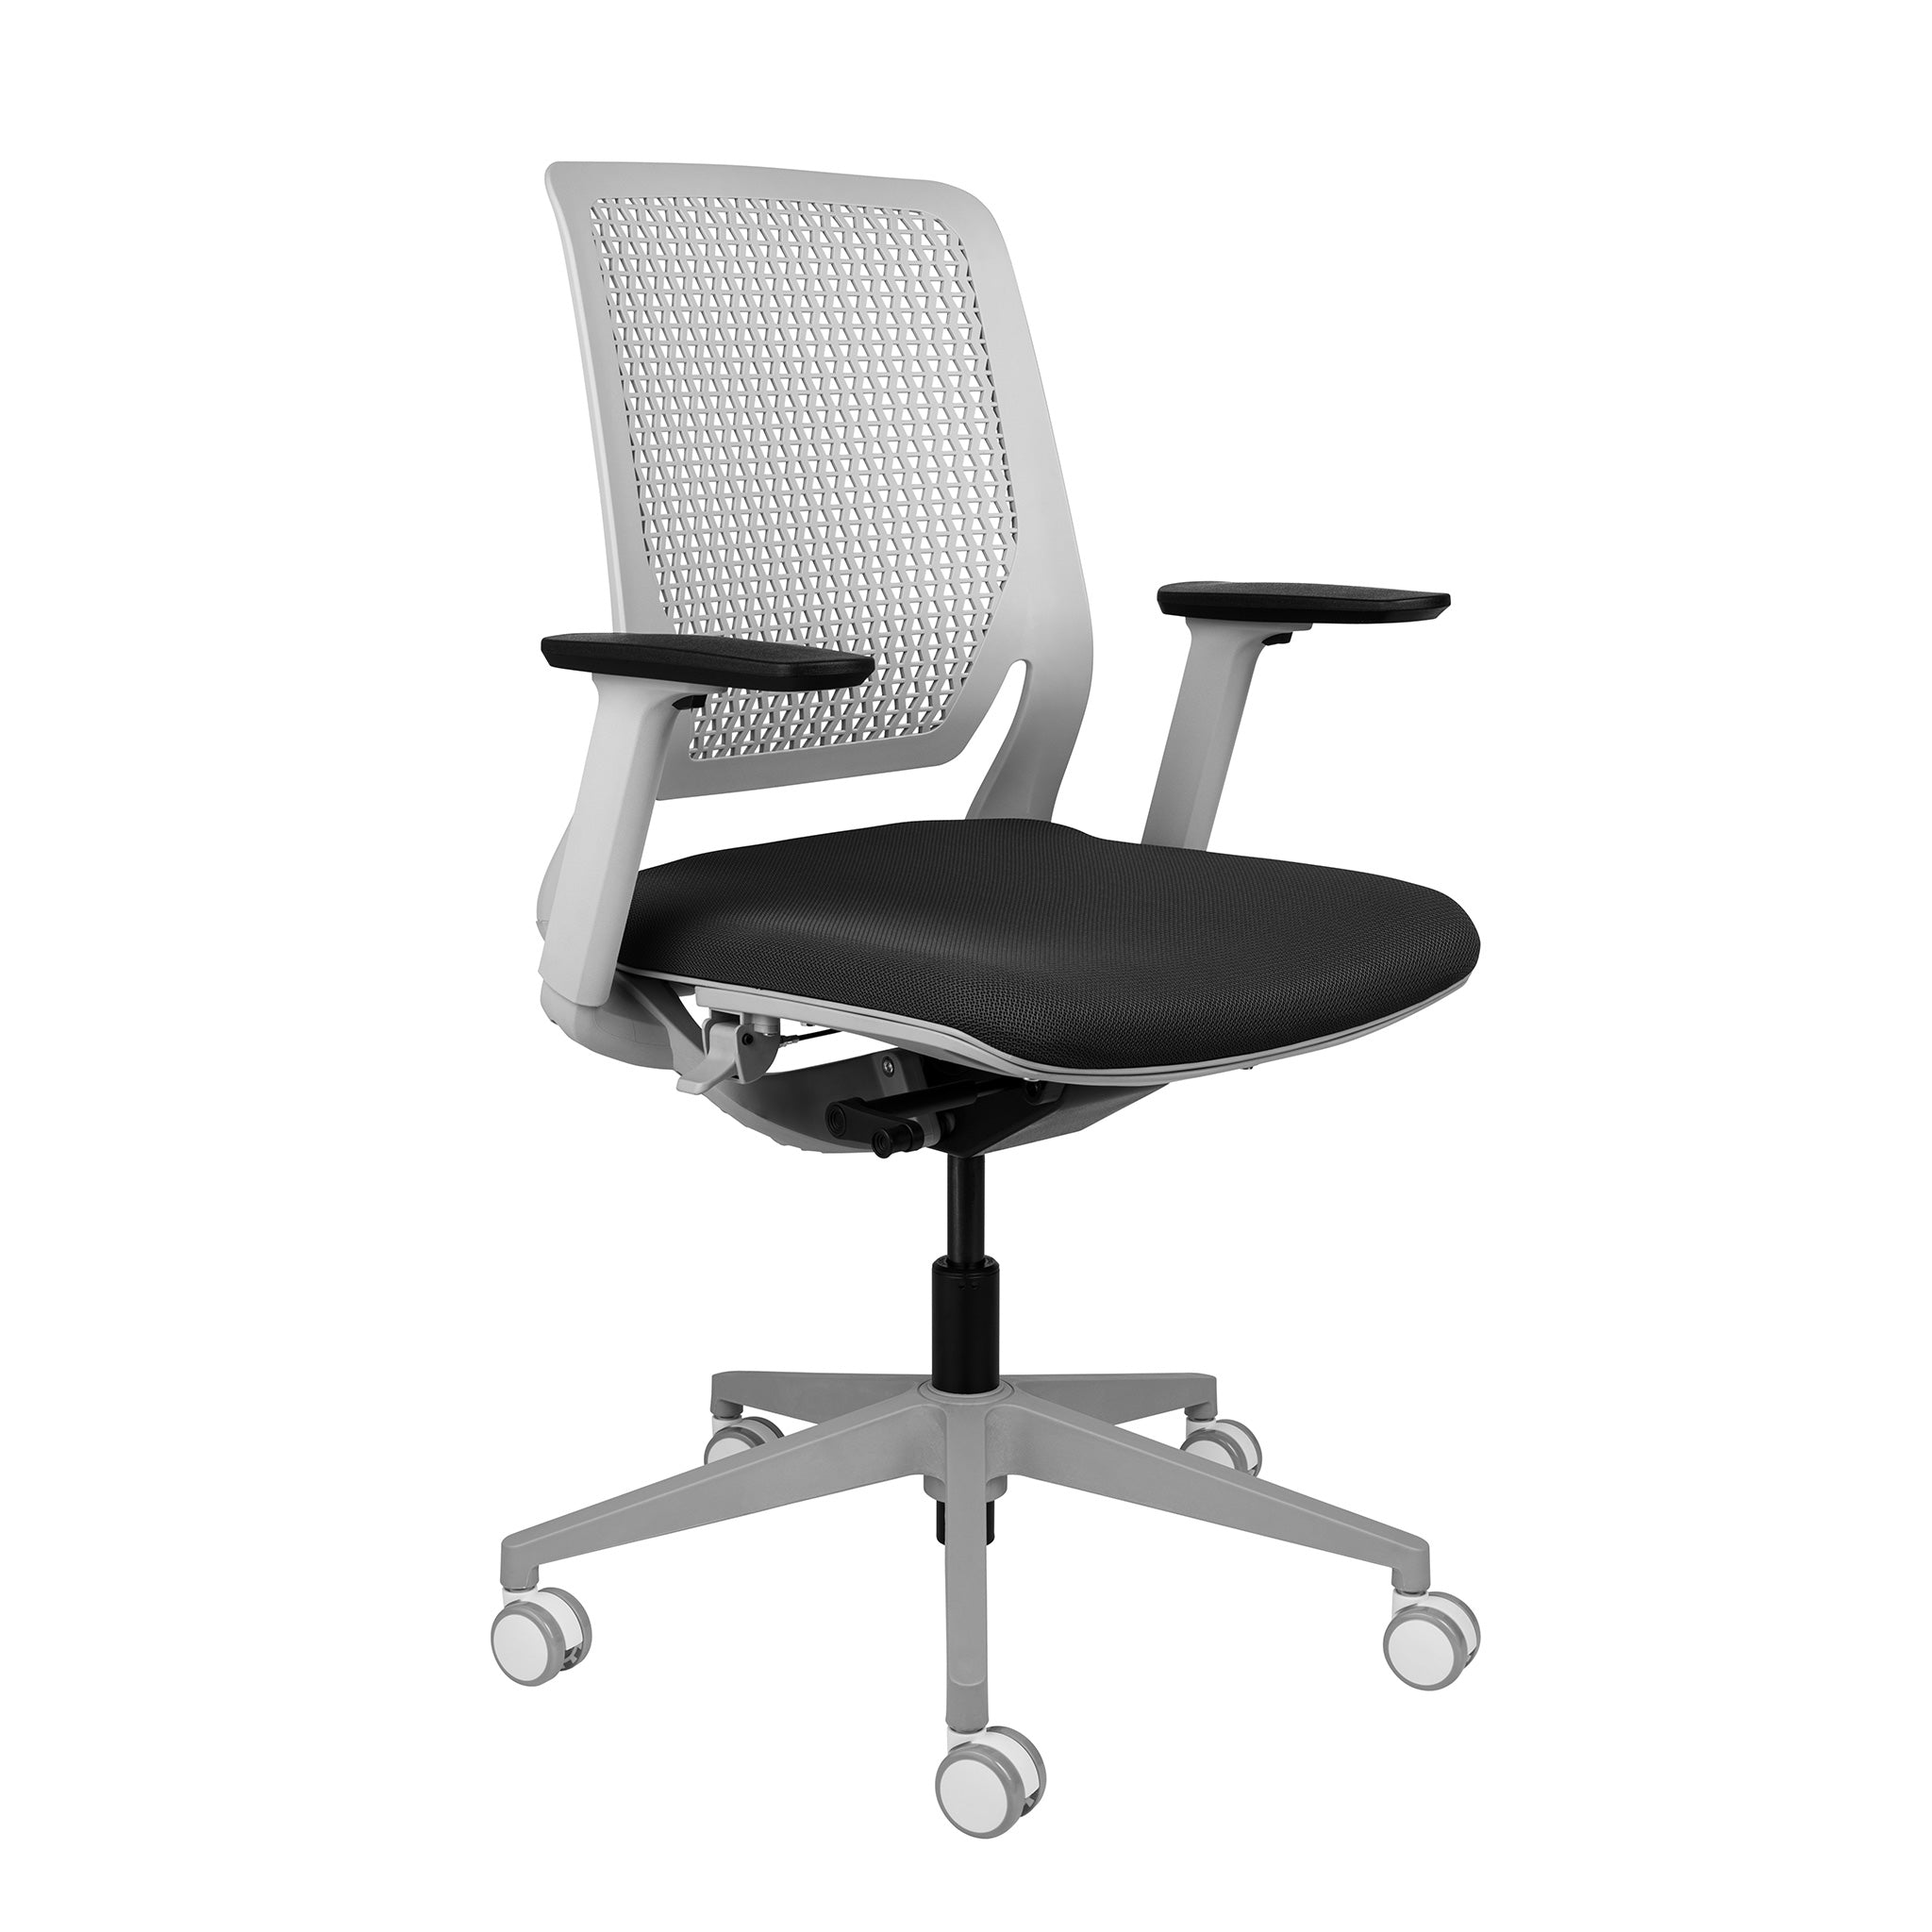 Laura Davidson Furniture Chair for Office Task, with Flat Elastic Bungie  Straps, Rolling, Adjustable Height and Arm Rest Made of Polyester, Alloy